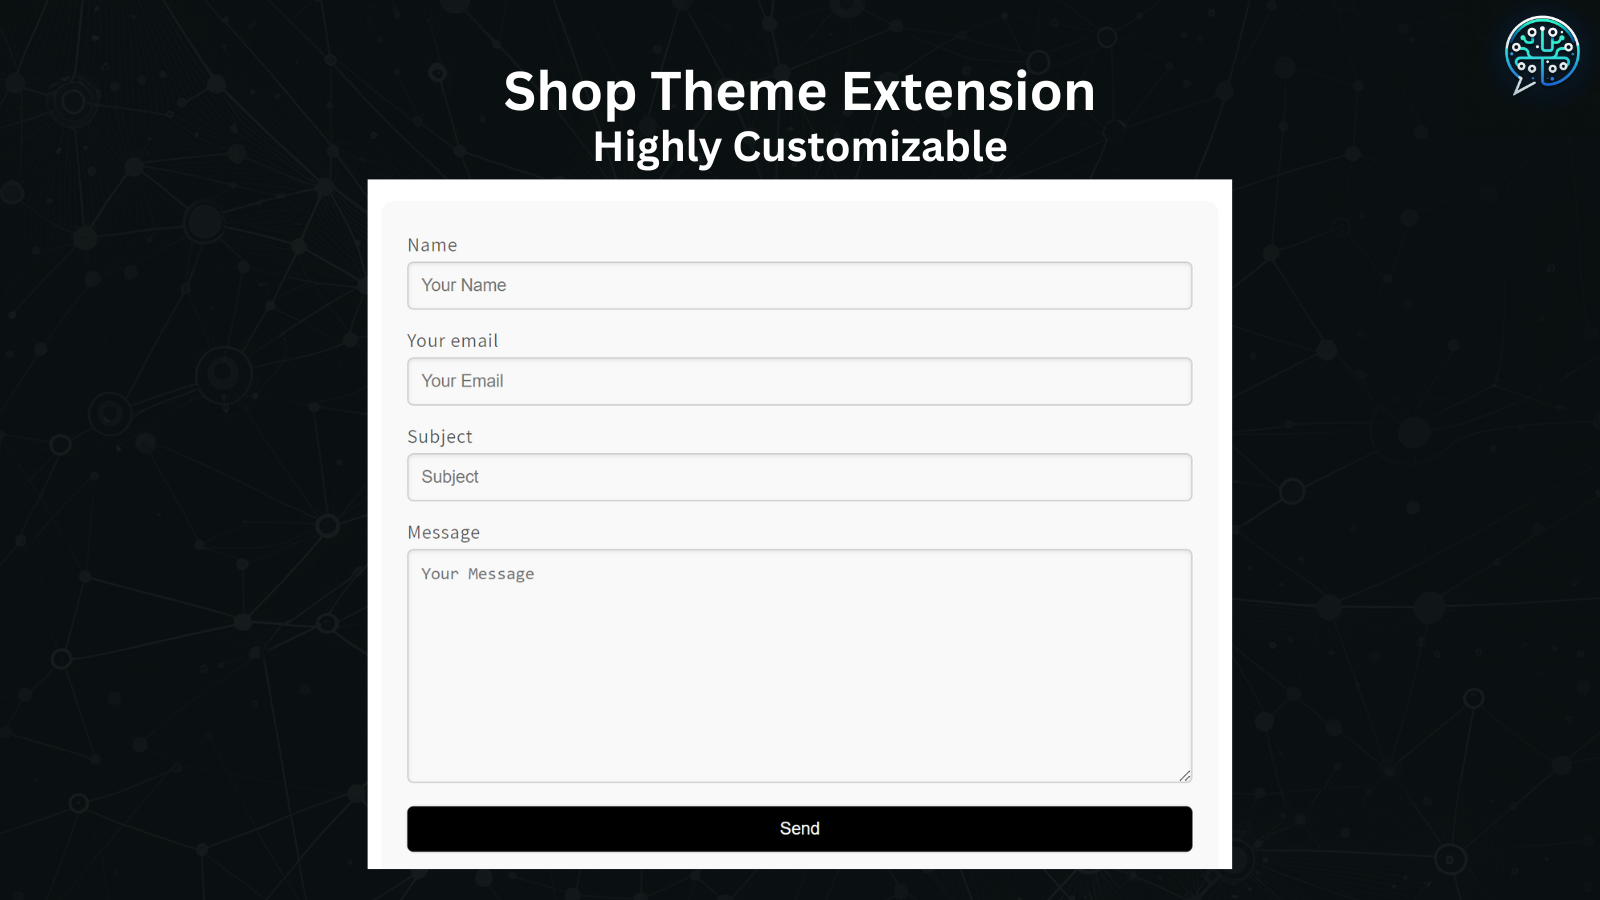 Theme Extension Contact